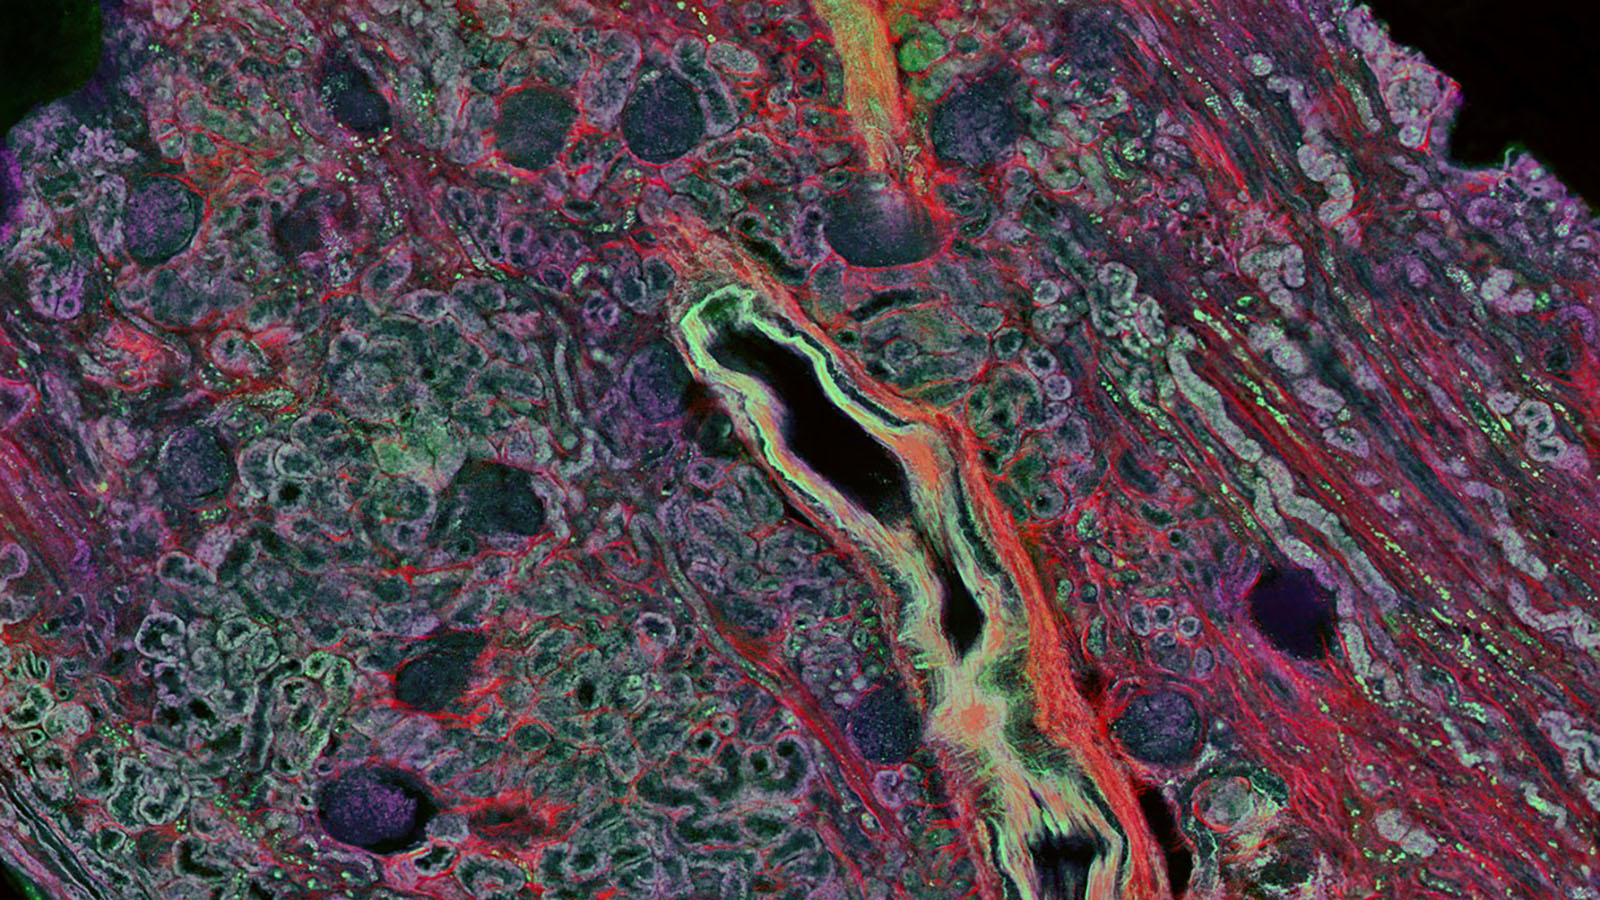 Autofluorescence image of human kidney cortex from Anthony Fung @UCSD showing the variations in cellular metabolism